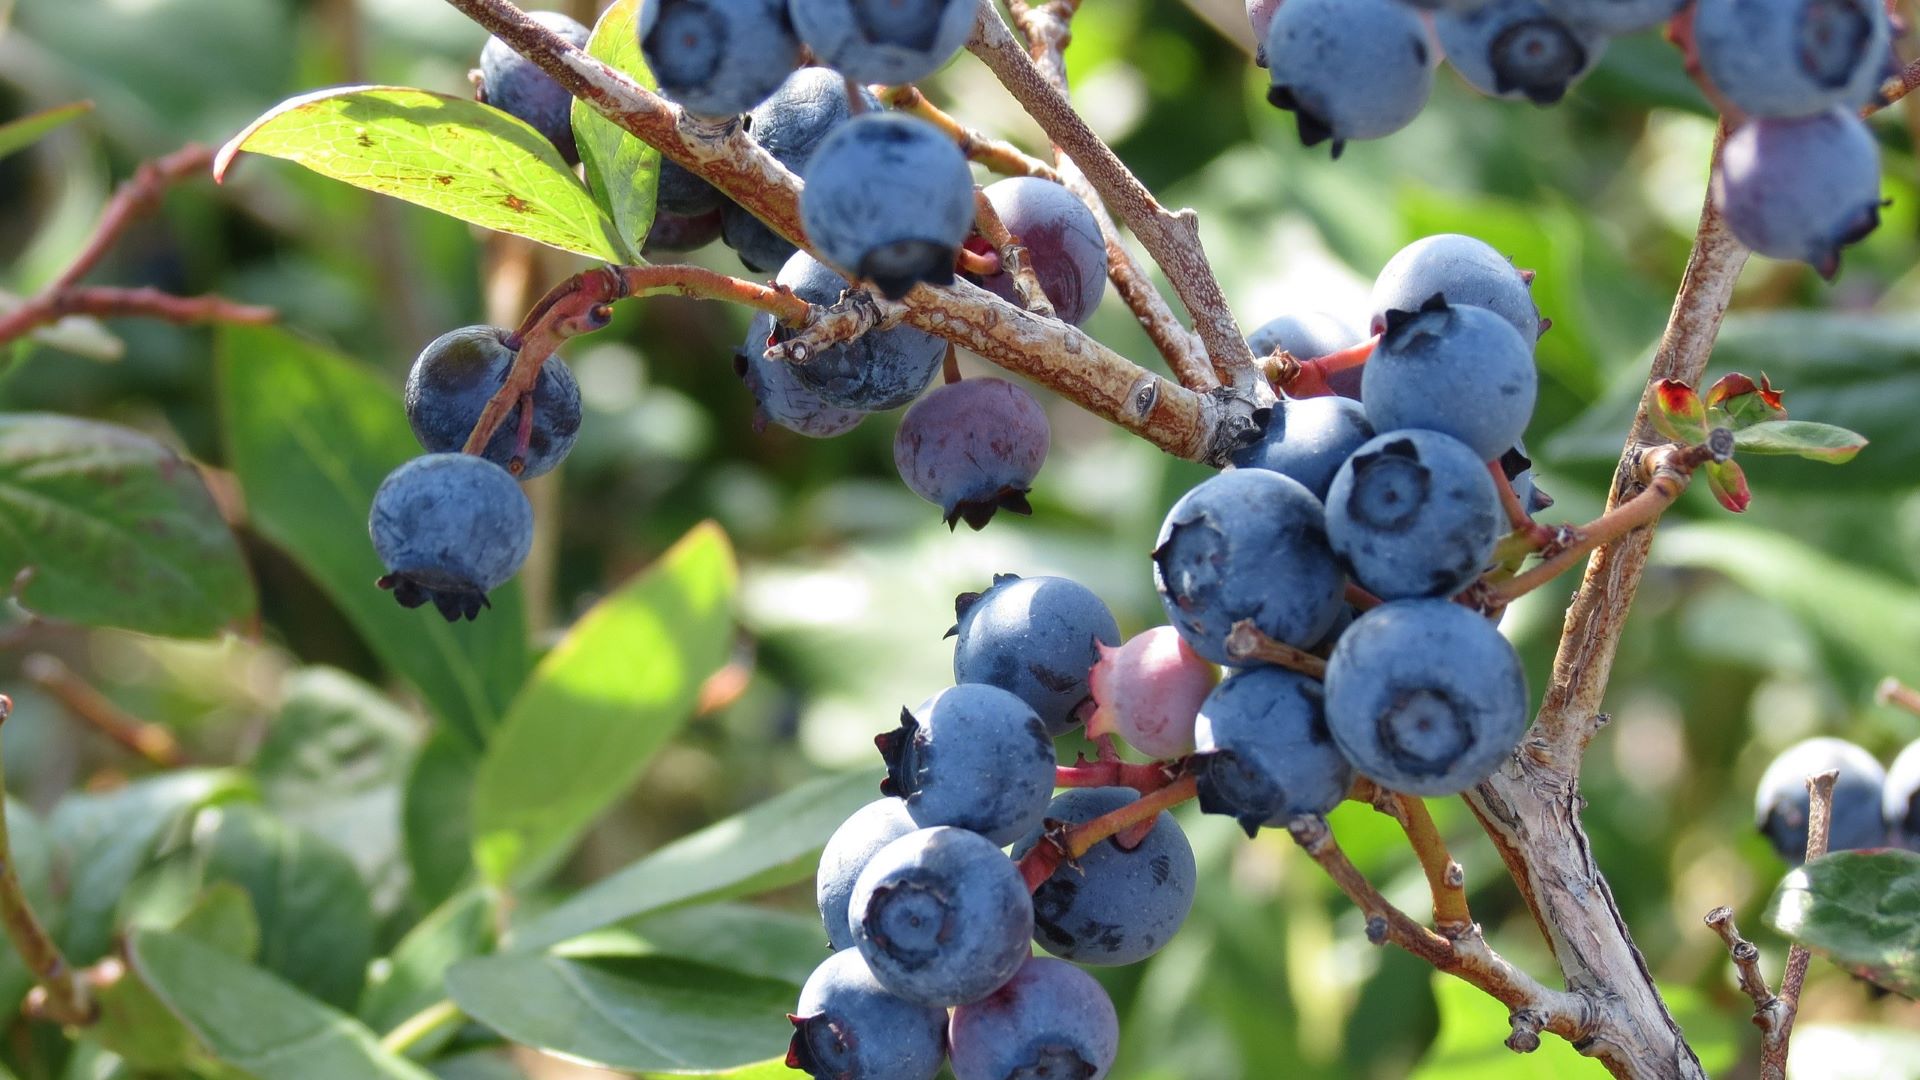 The price of picking blueberries in rural Maine